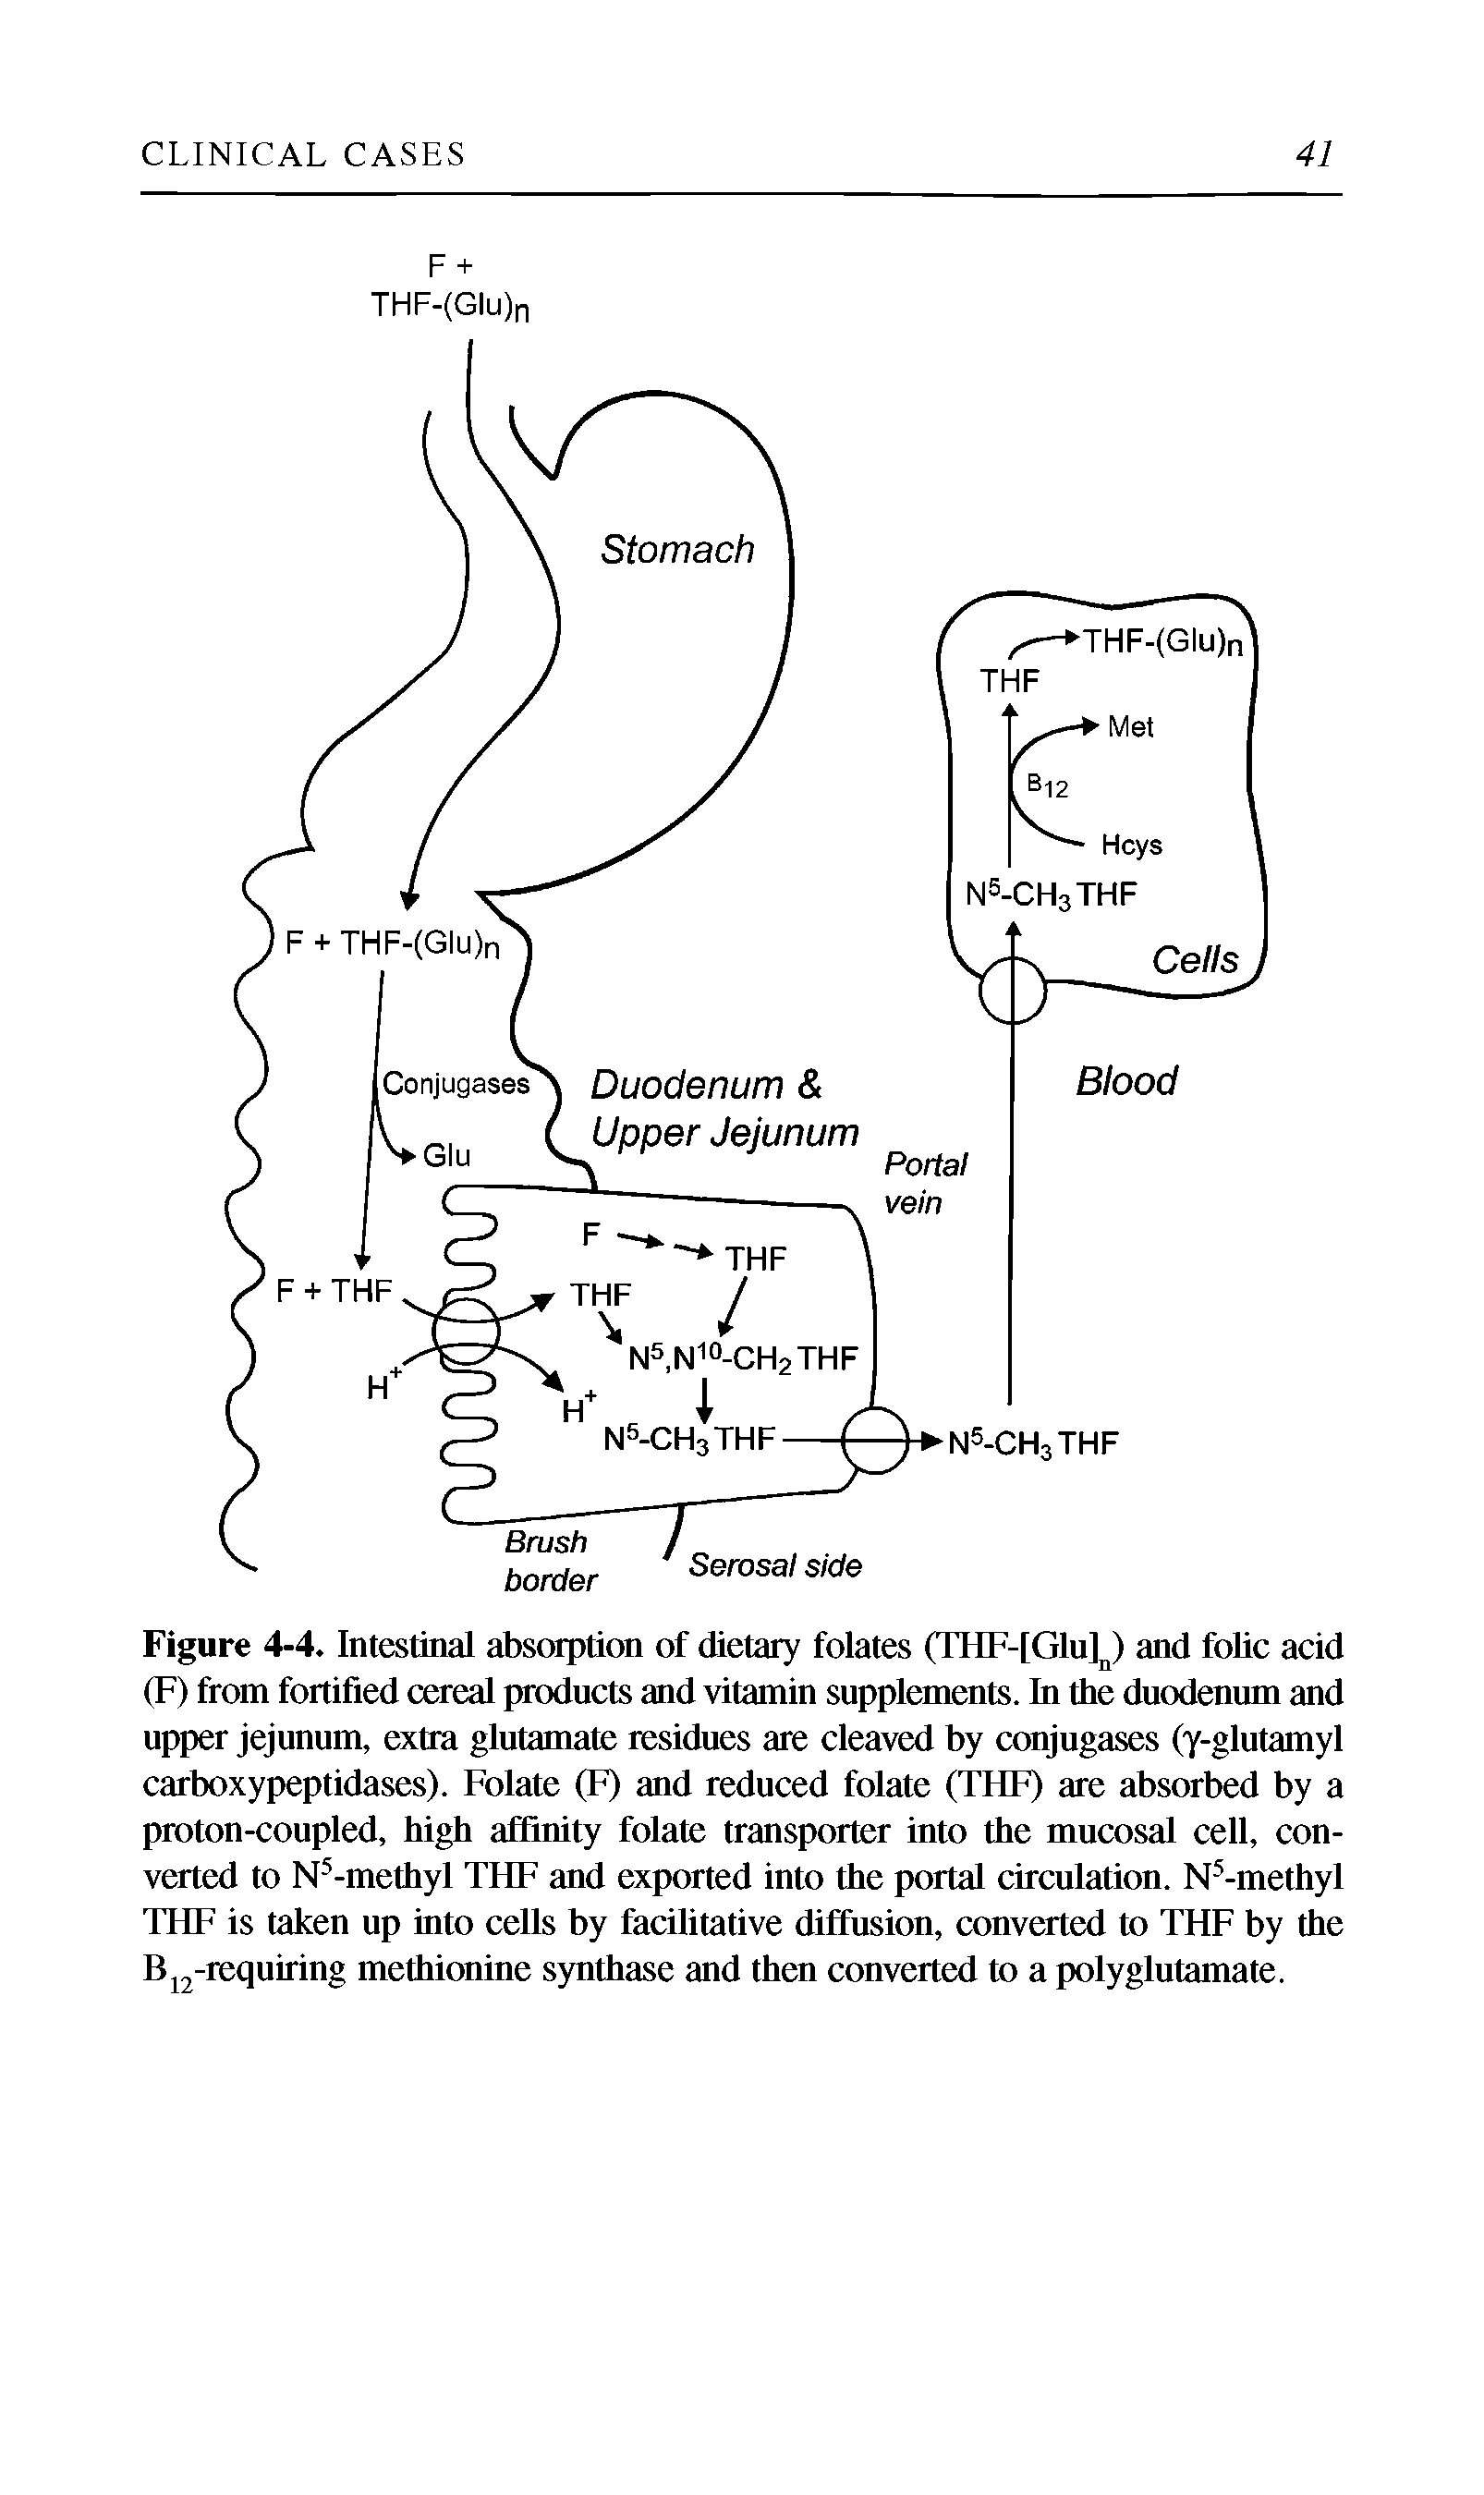 Figure 4-4. Intestinal absorption of dietary folates (THF-[Gluy and foUc acid (F) from fortified cereal products and vitamin supplements. In the duodenum and upper jejunum, extra glutamate residues are cleaved by conjugases (y-glutamyl carboxypeptidases). Folate (F) and reduced folate (THF) are absorbed by a proton-coupled, high affinity folate transporter into the mucosal cell, converted to N -methyl THF and exported into the portal circulation. N -methyl THF is taken up into cells by facilitative diffusion, converted to THF by the Bj -requiring methionine synthase and then converted to a polyglutamate.